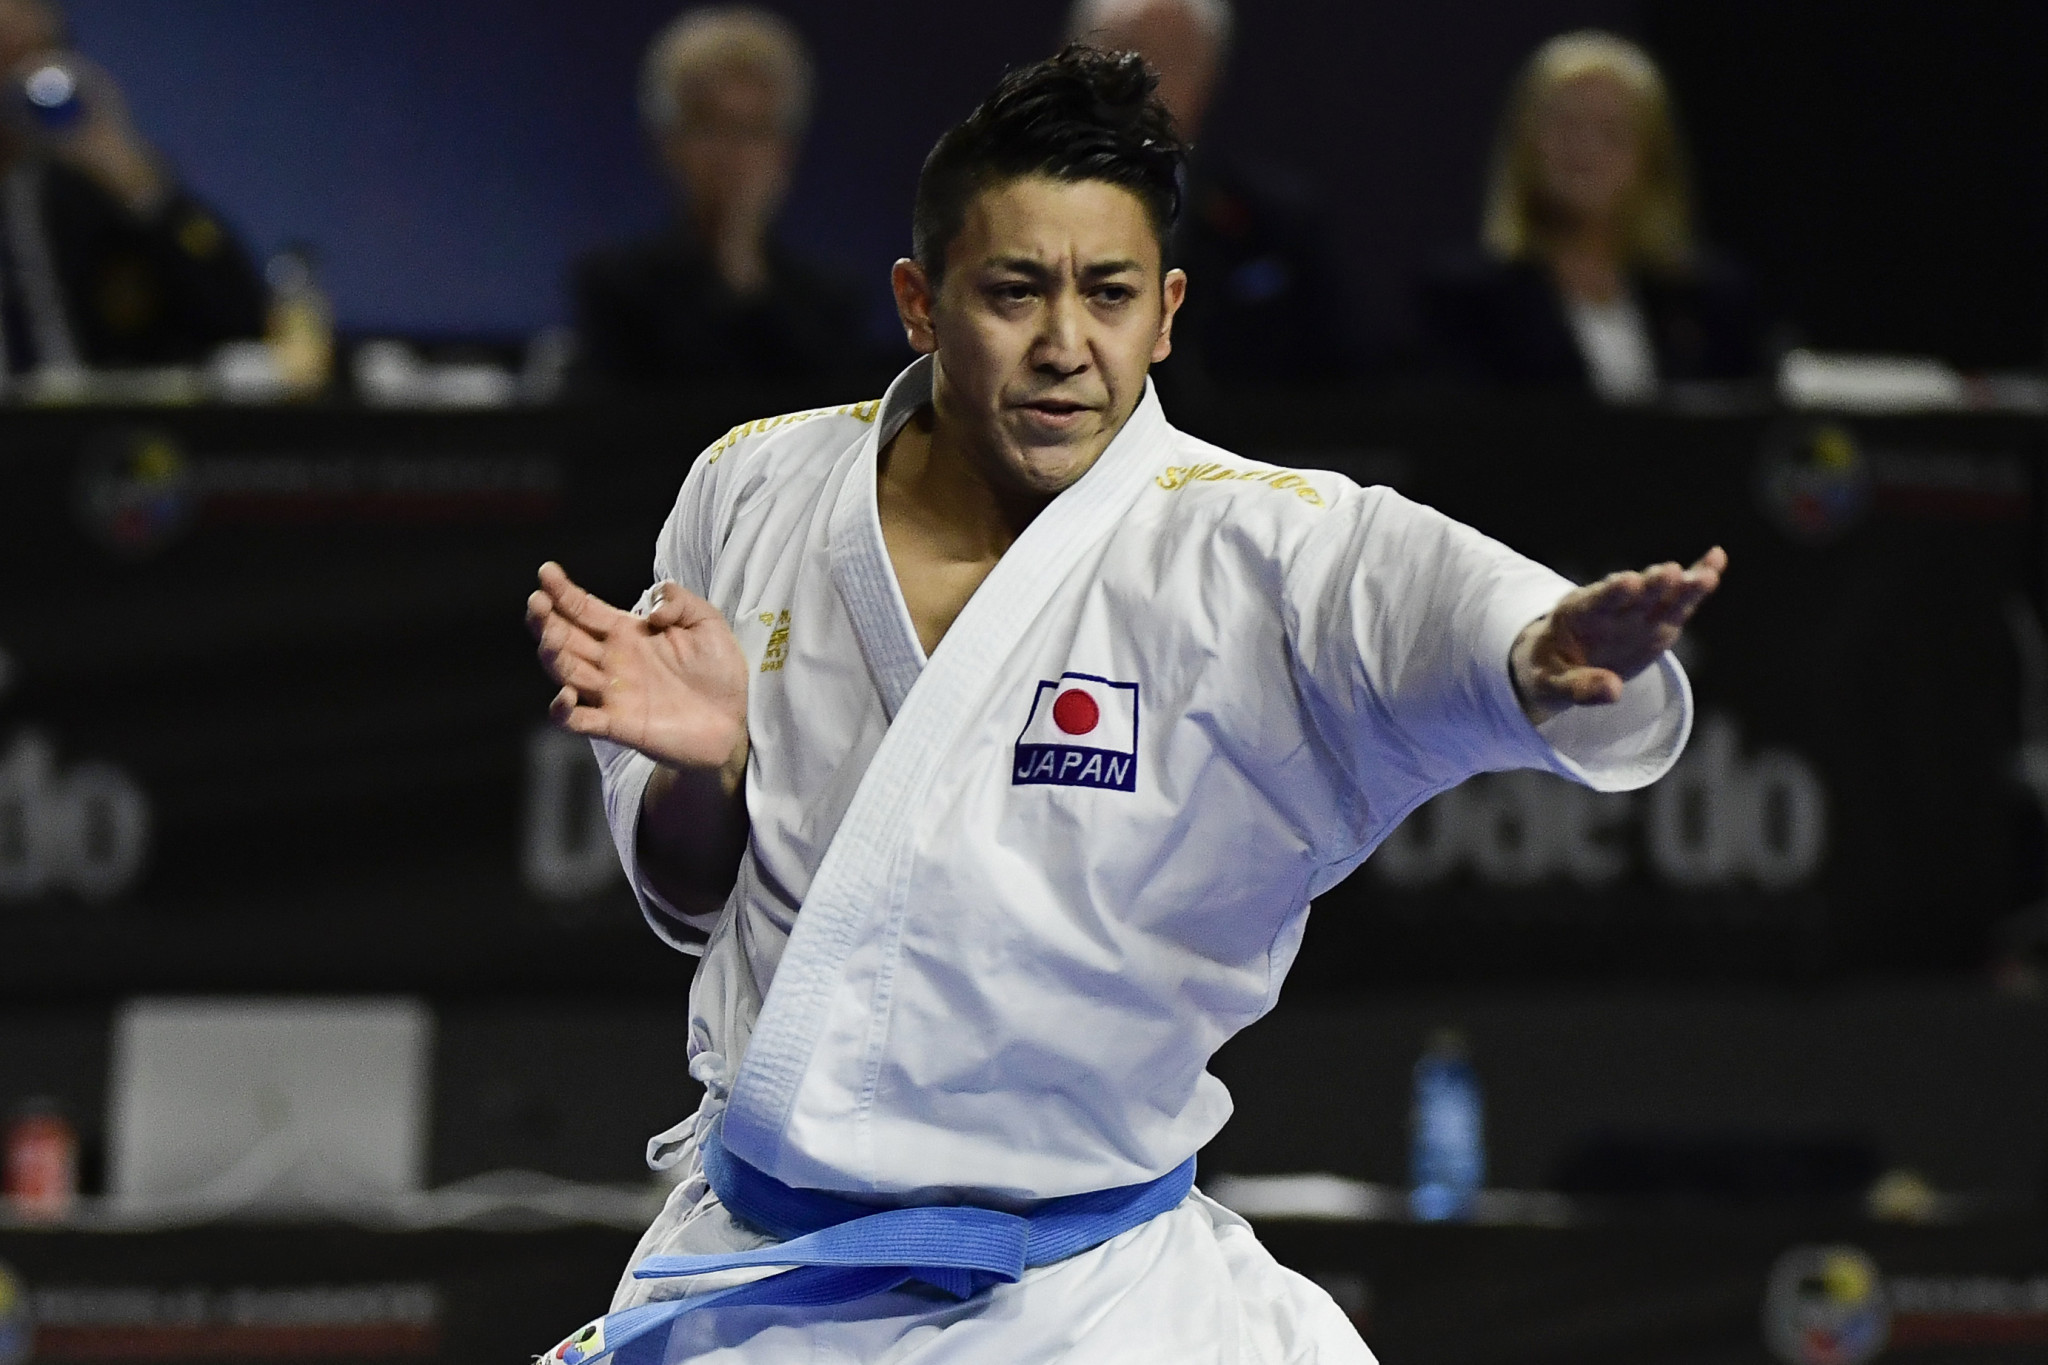 Japan's Ryo Kiyuna has qualified for the 2019 ANOC World Beach Games in San Diego after winning November's Karate World Championships ©Getty Images